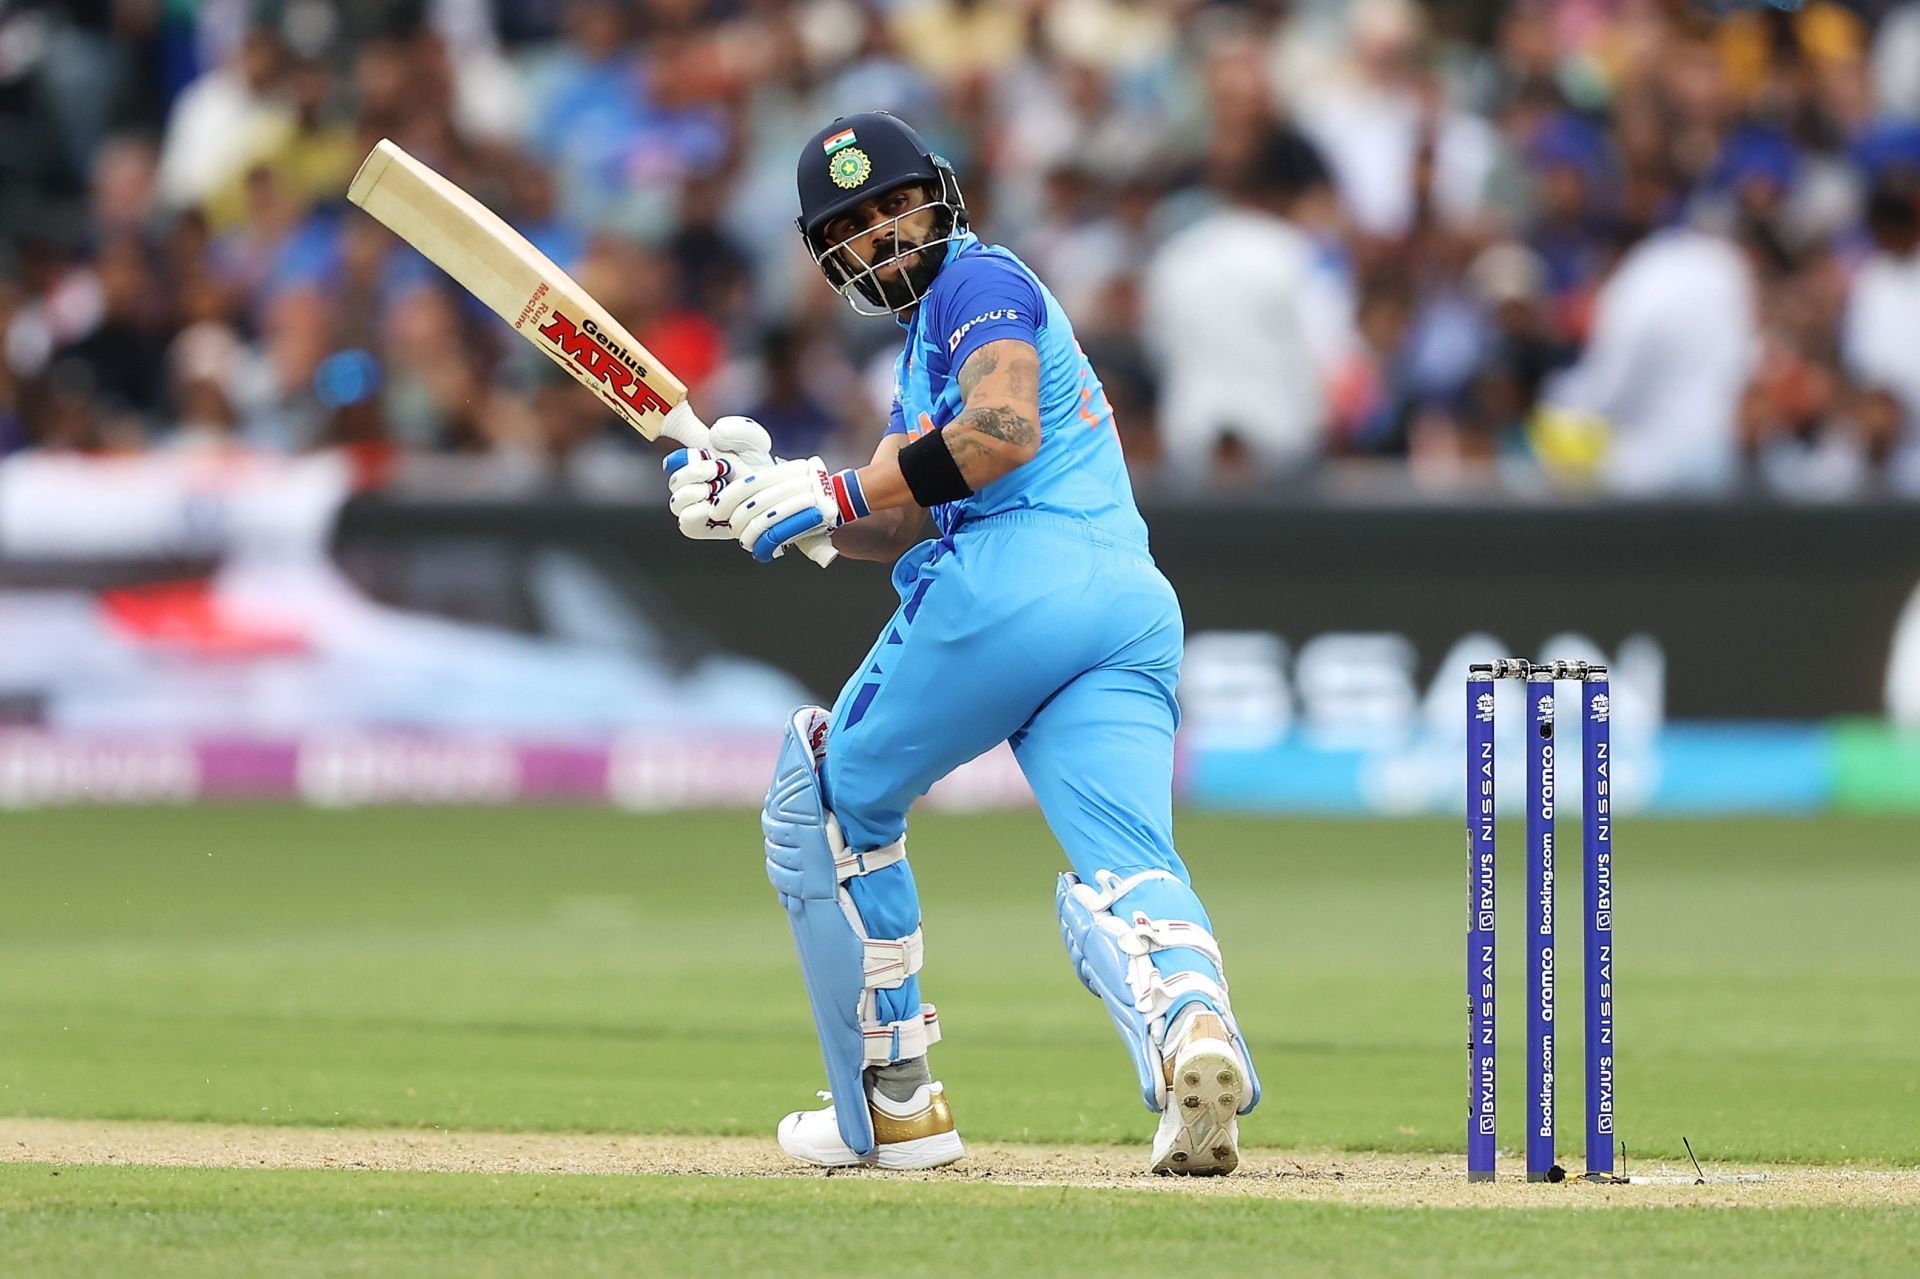 Virat Kohli has always been amongst the runs in T20 World Cup knockout games.